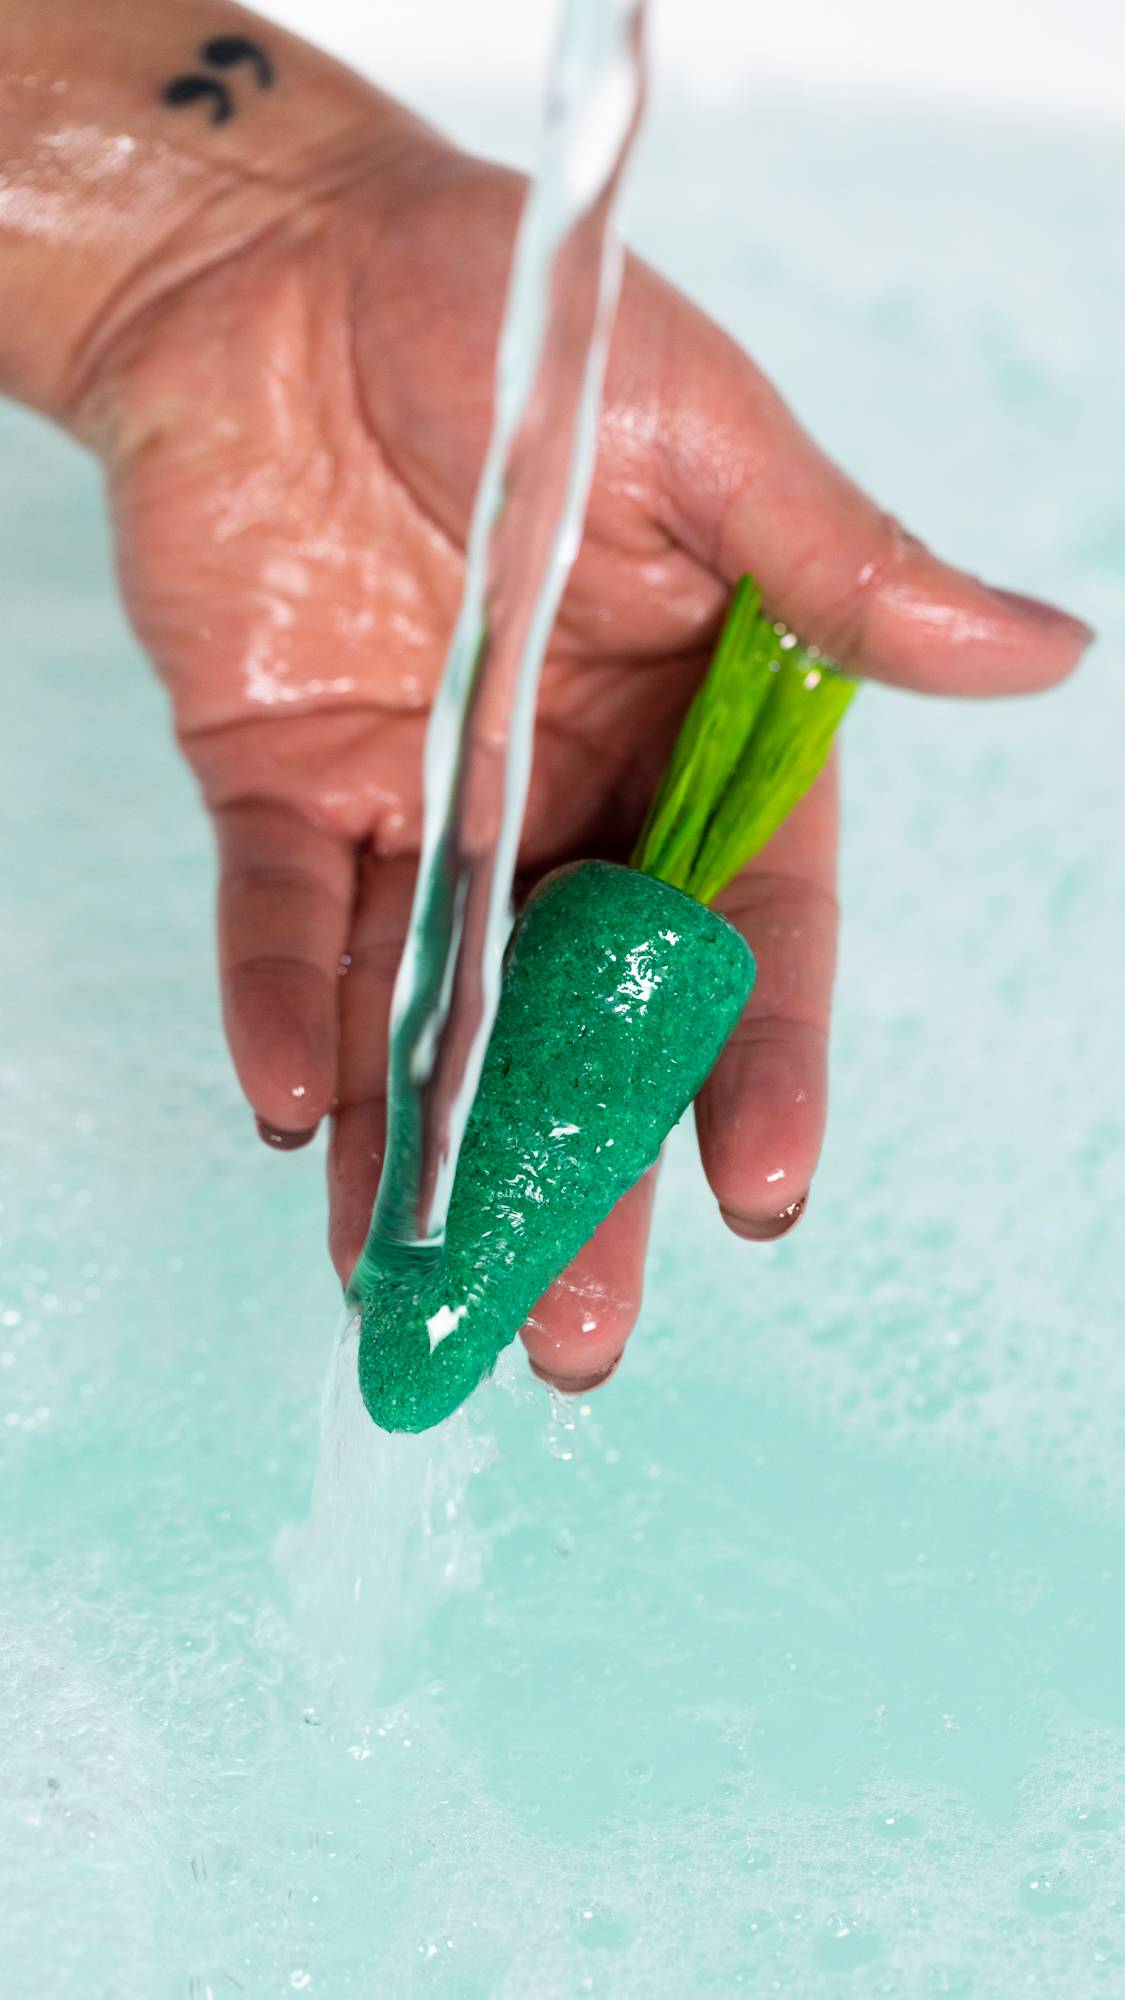 A close-up image of the model's hand holding the green carrot bubble bar under running water creating fresh, bubbly water below. 